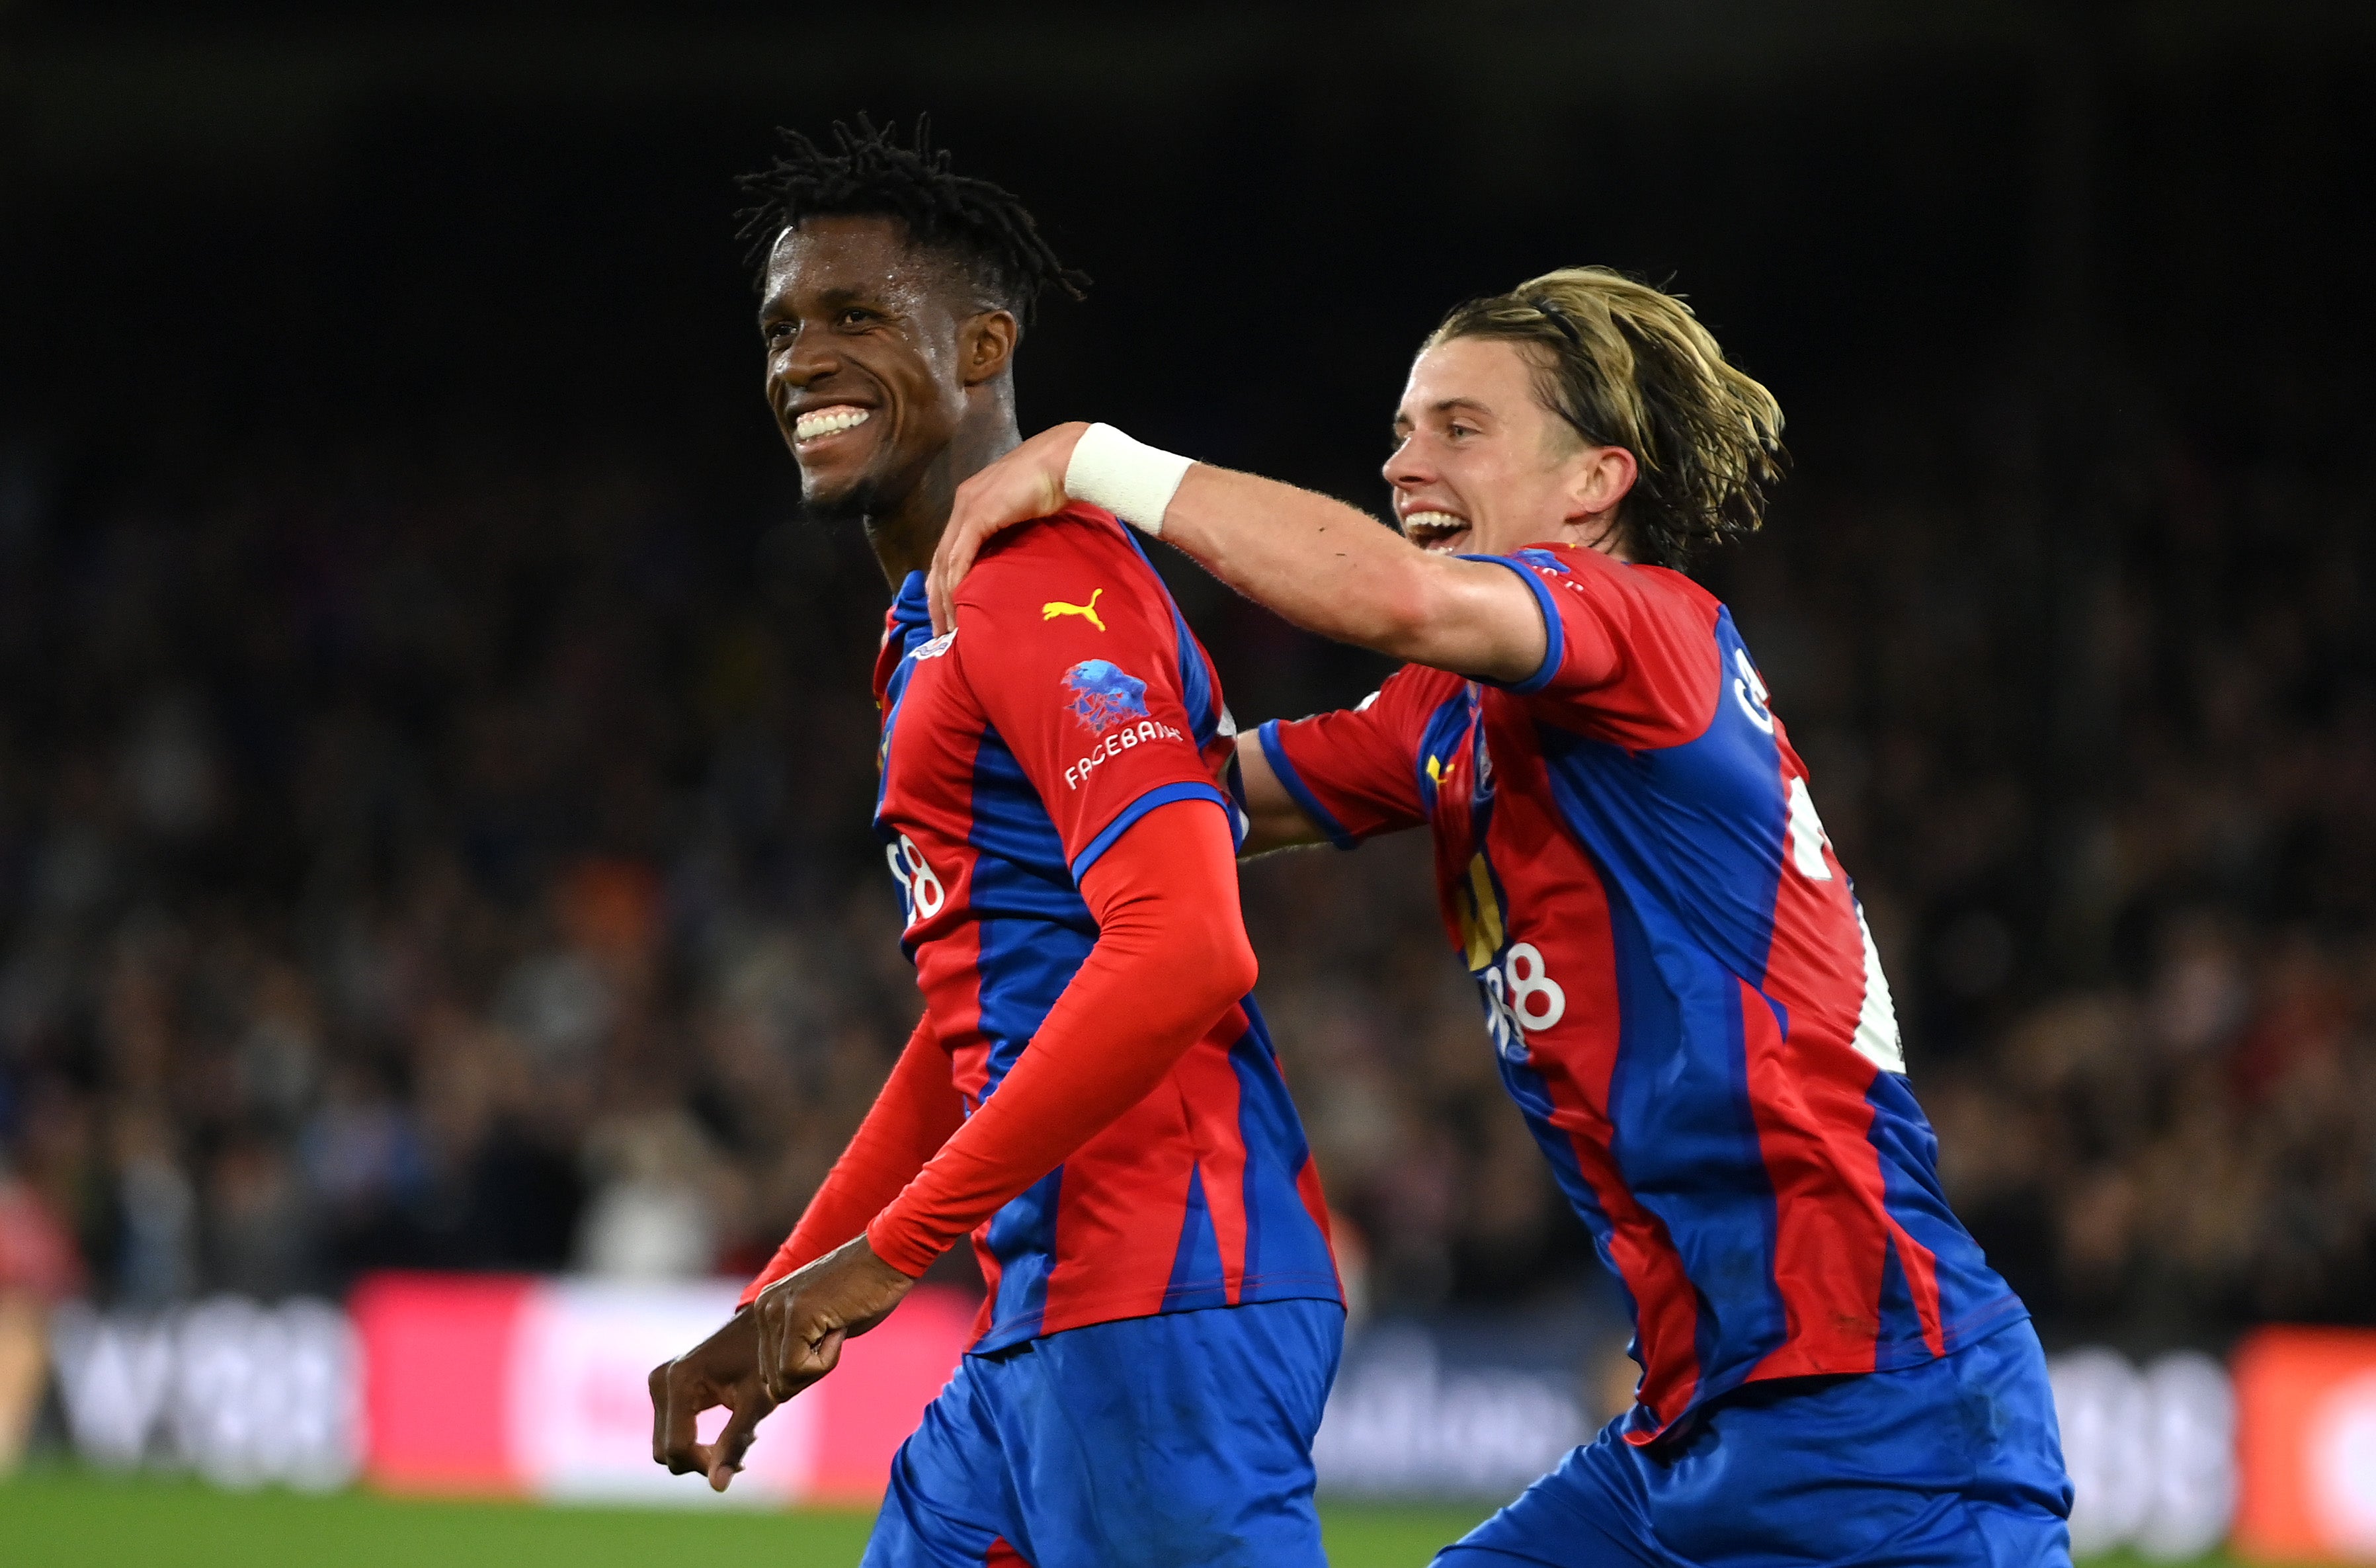 Crystal Palace’s Wilfried Zaha celebrates with Conor Gallagher